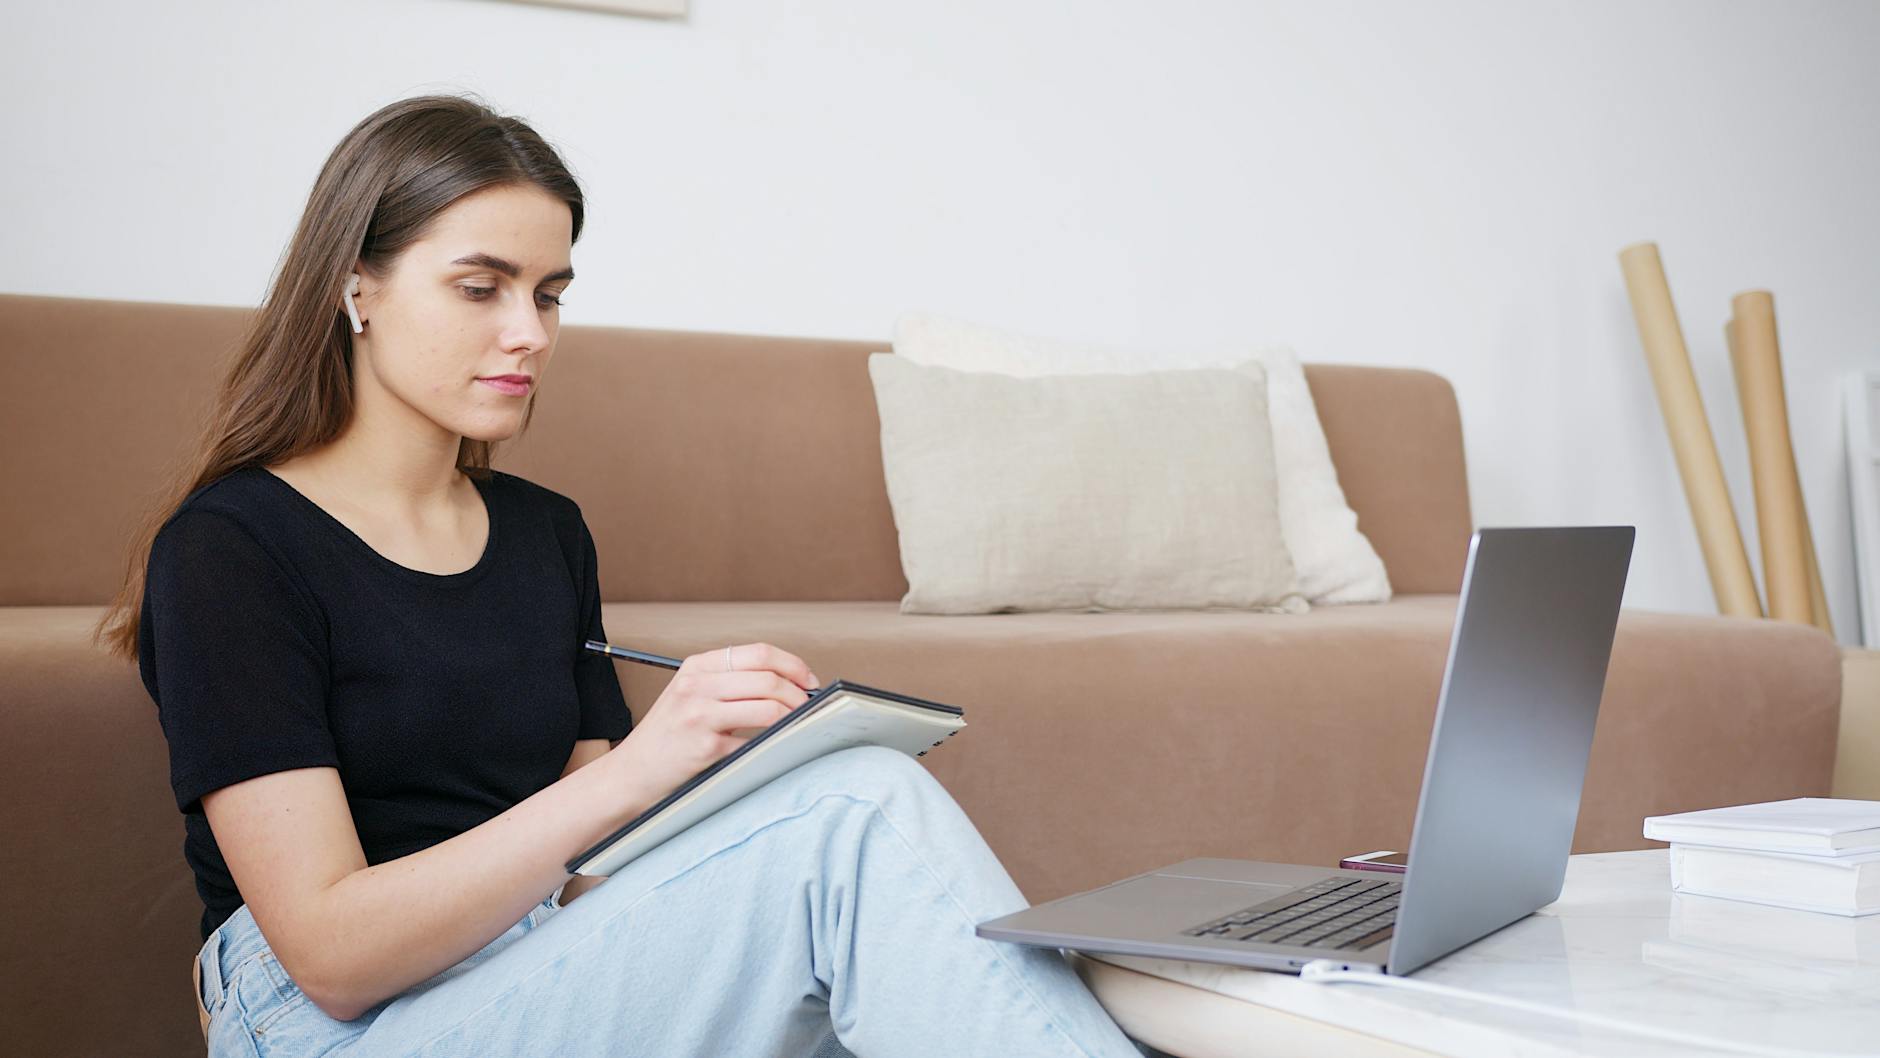 Glad young lady in jeans and black shirt writing down notes while attending online lesson